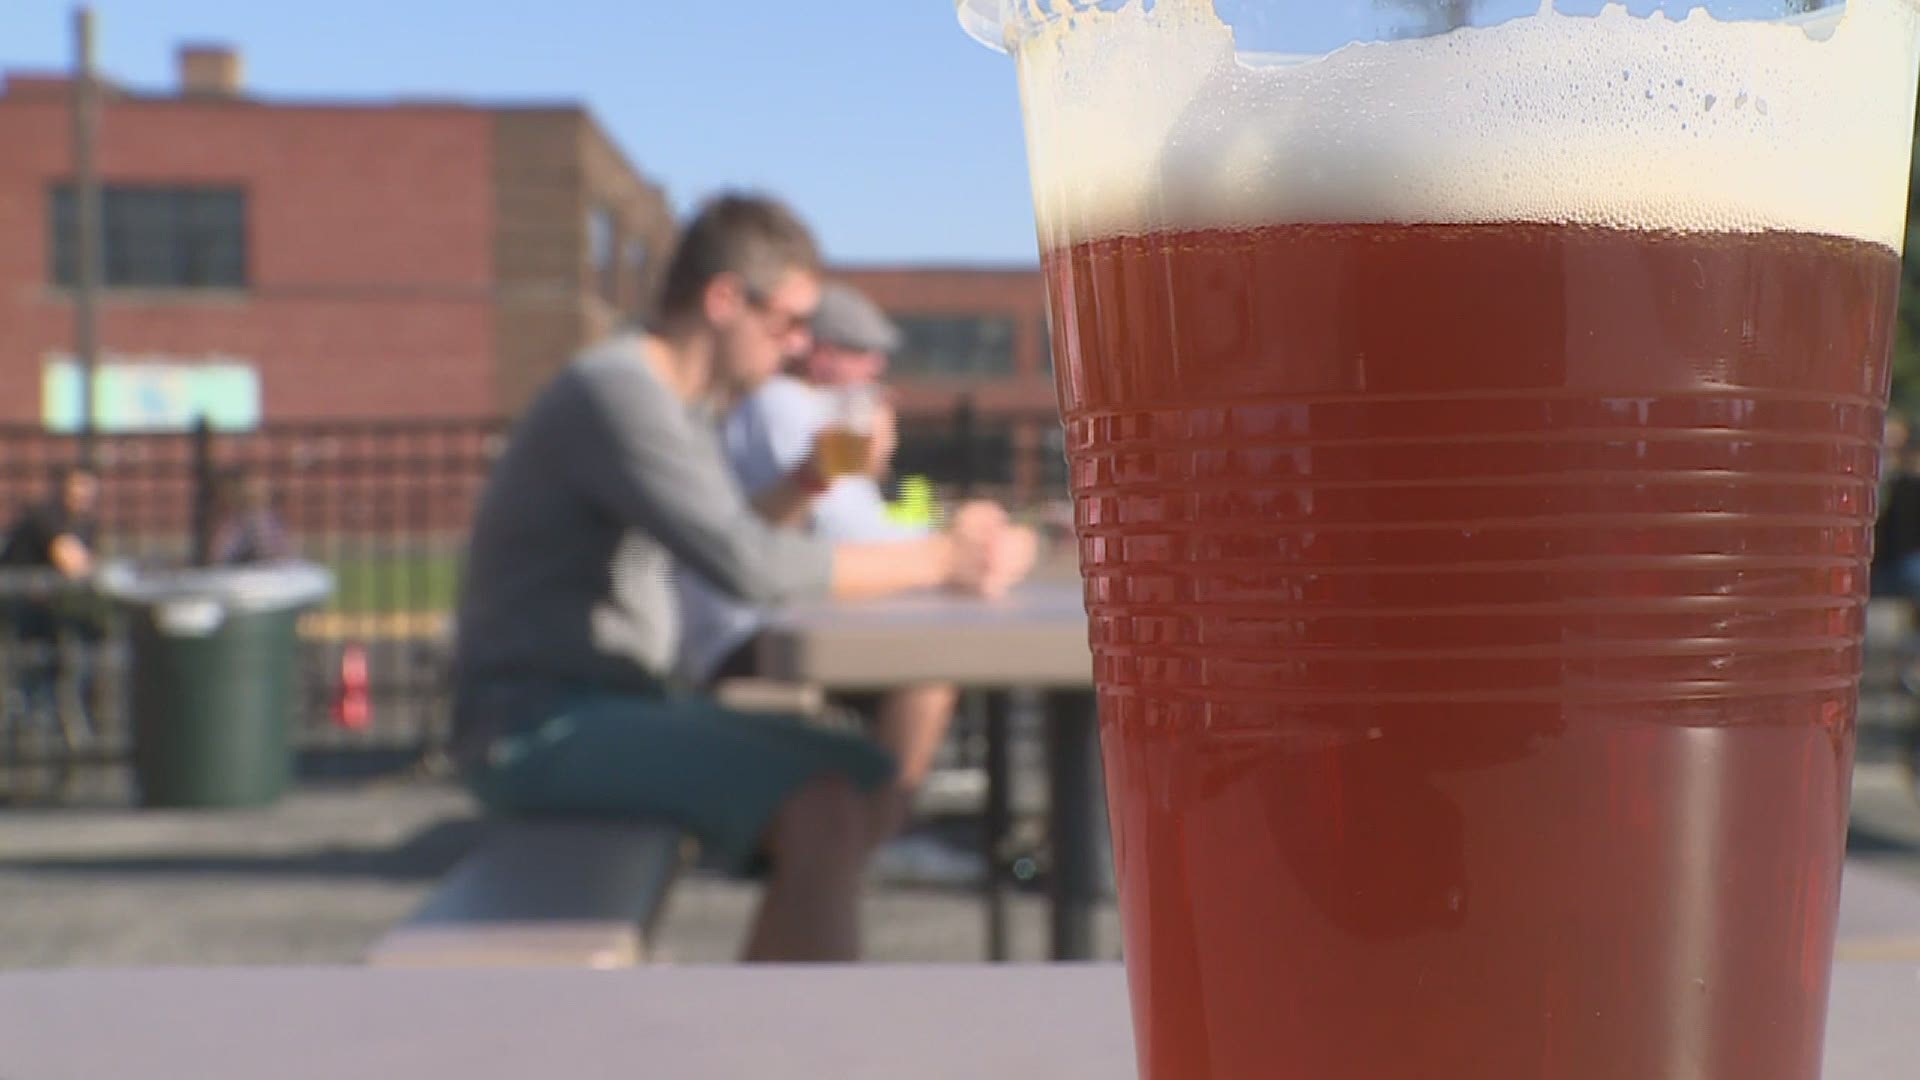 The beer is now being sold at WAKE Brewing in Rock Island for $5 a glass, or $18 for a pack of four cans.